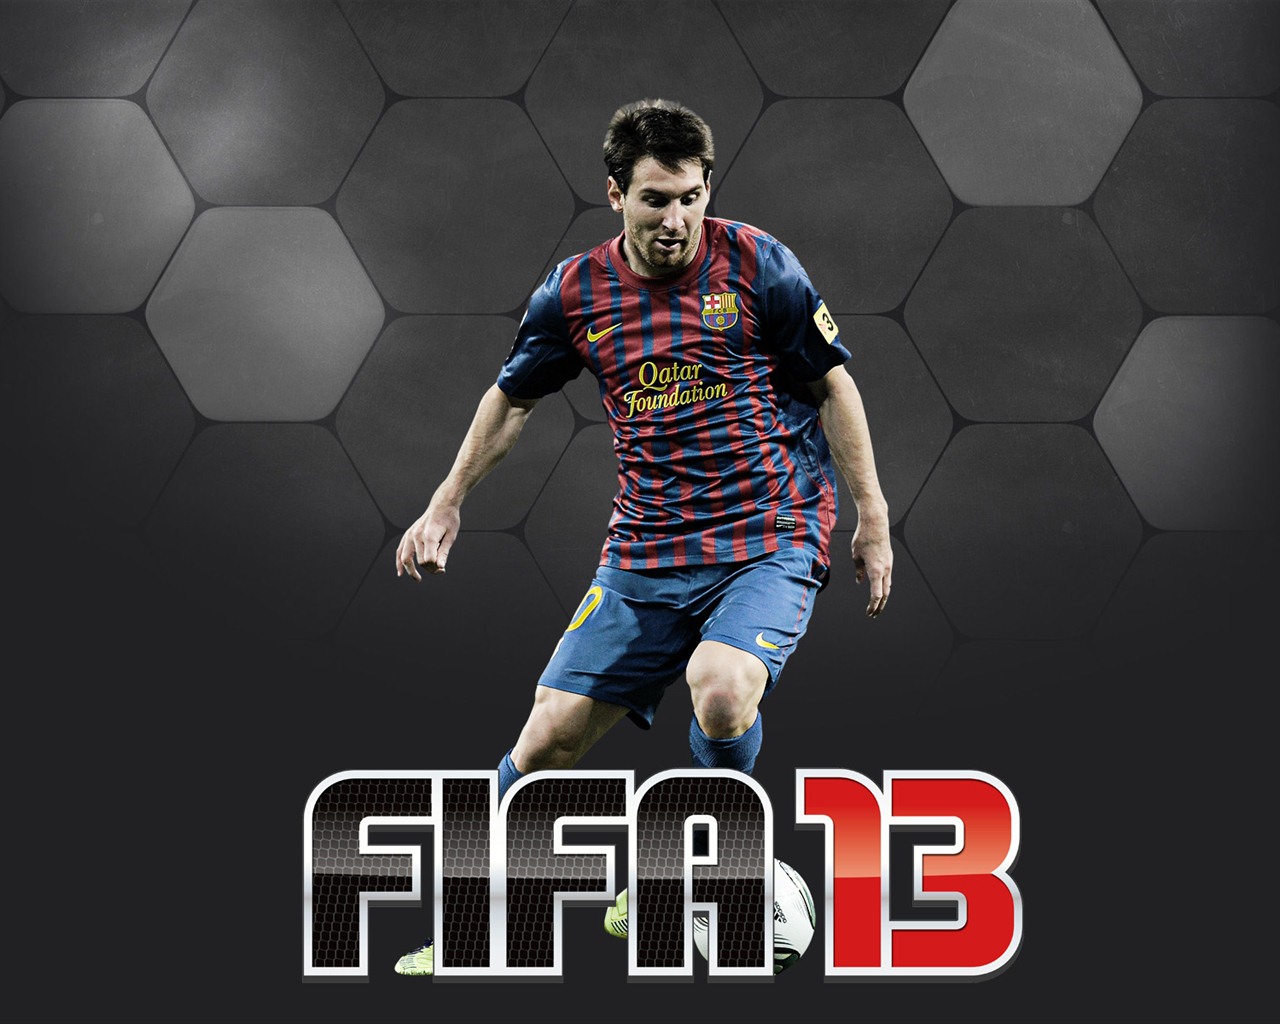 FIFA 13 game HD wallpapers #6 - 1280x1024